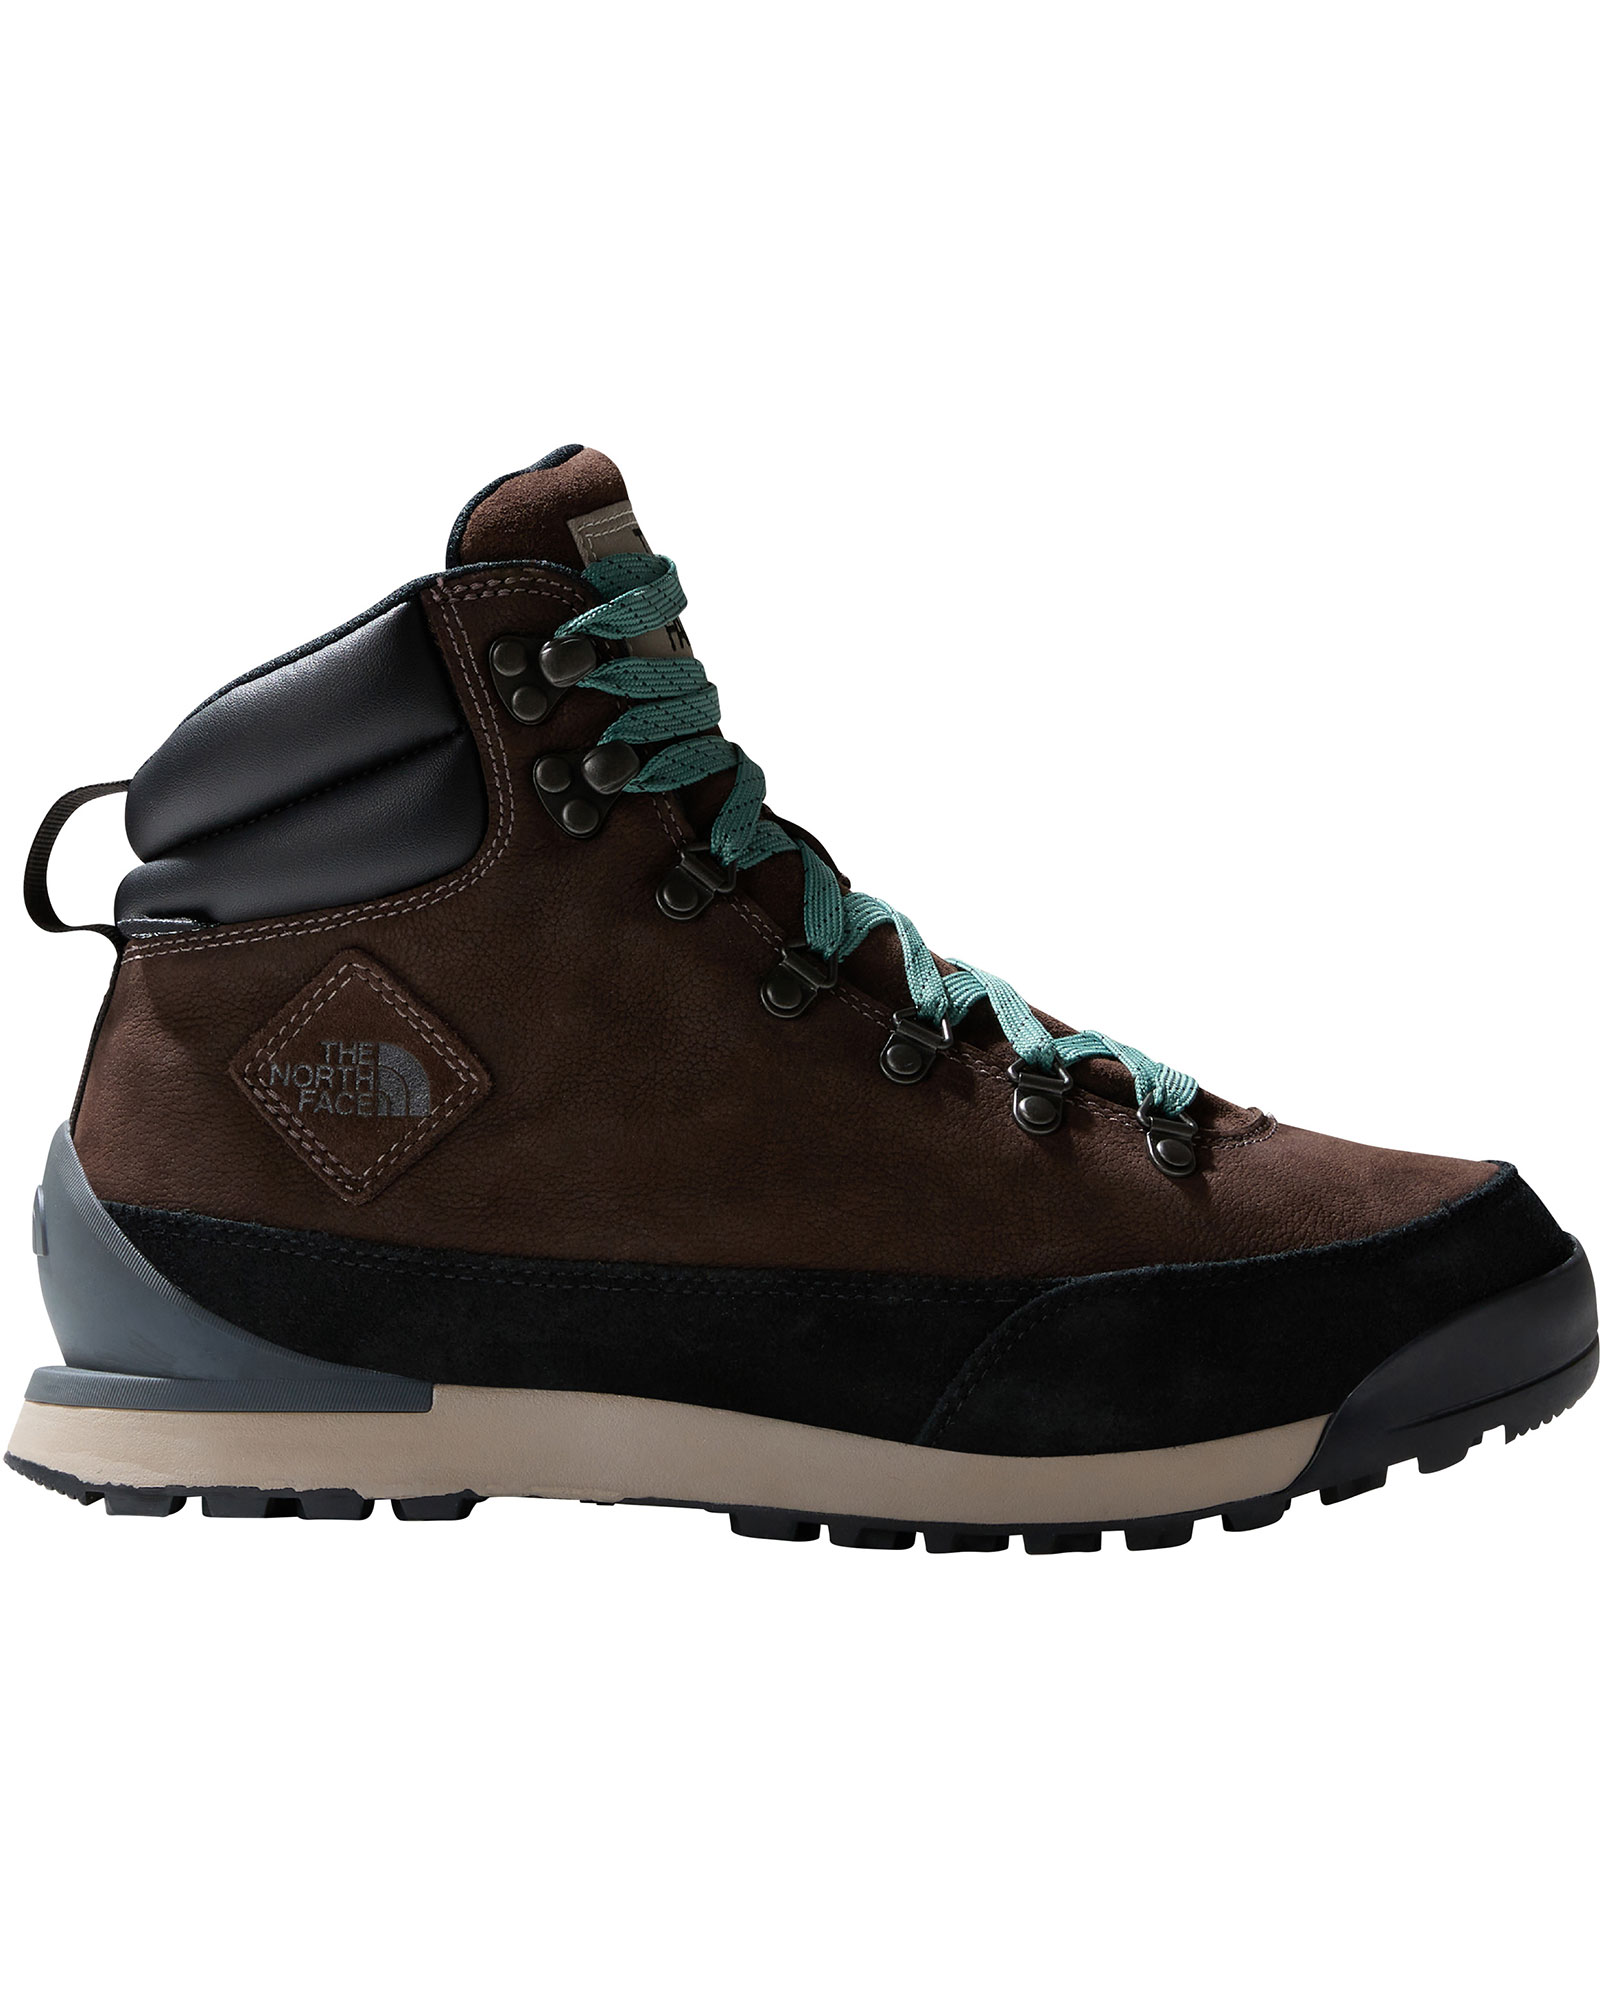 The North Face Back to Berkeley IV Leather Waterproof Men’s Boots - Demitasse Brown/TNF Black UK 9